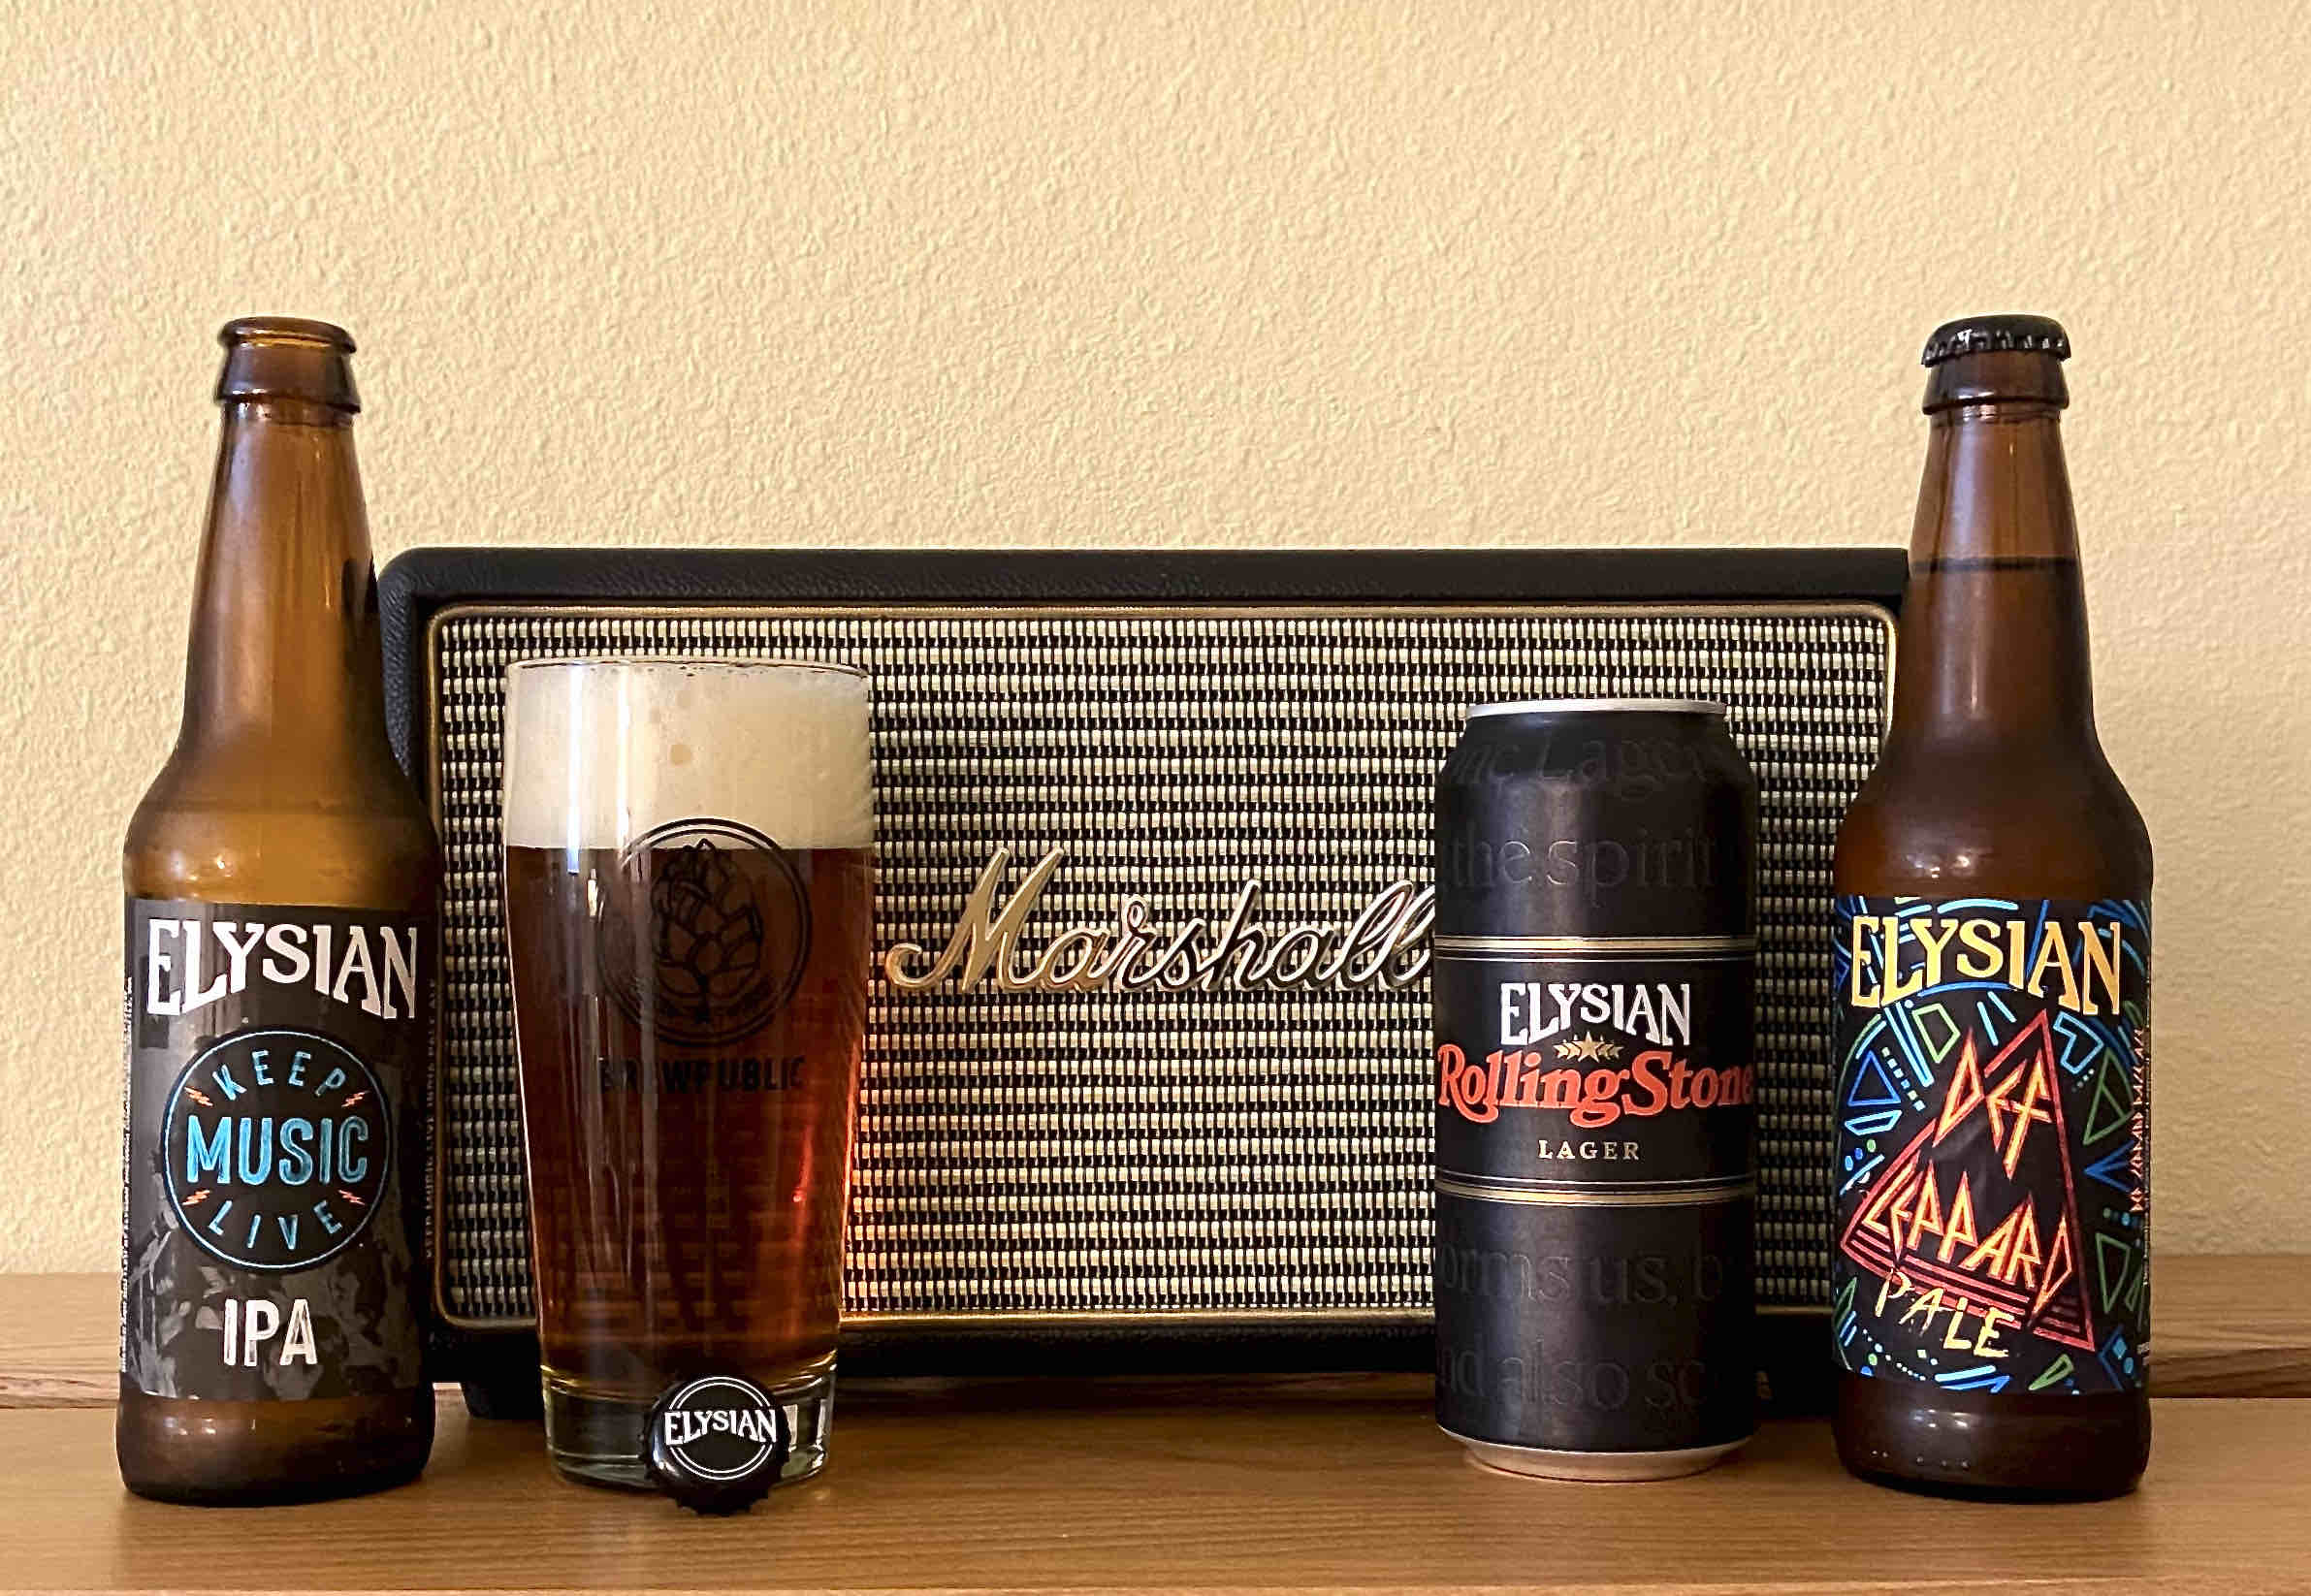 Elysian Brewing supports music with Keep Music Live IPA, Elysian & Rolling Stone Lager, and Def Leppard Pale.